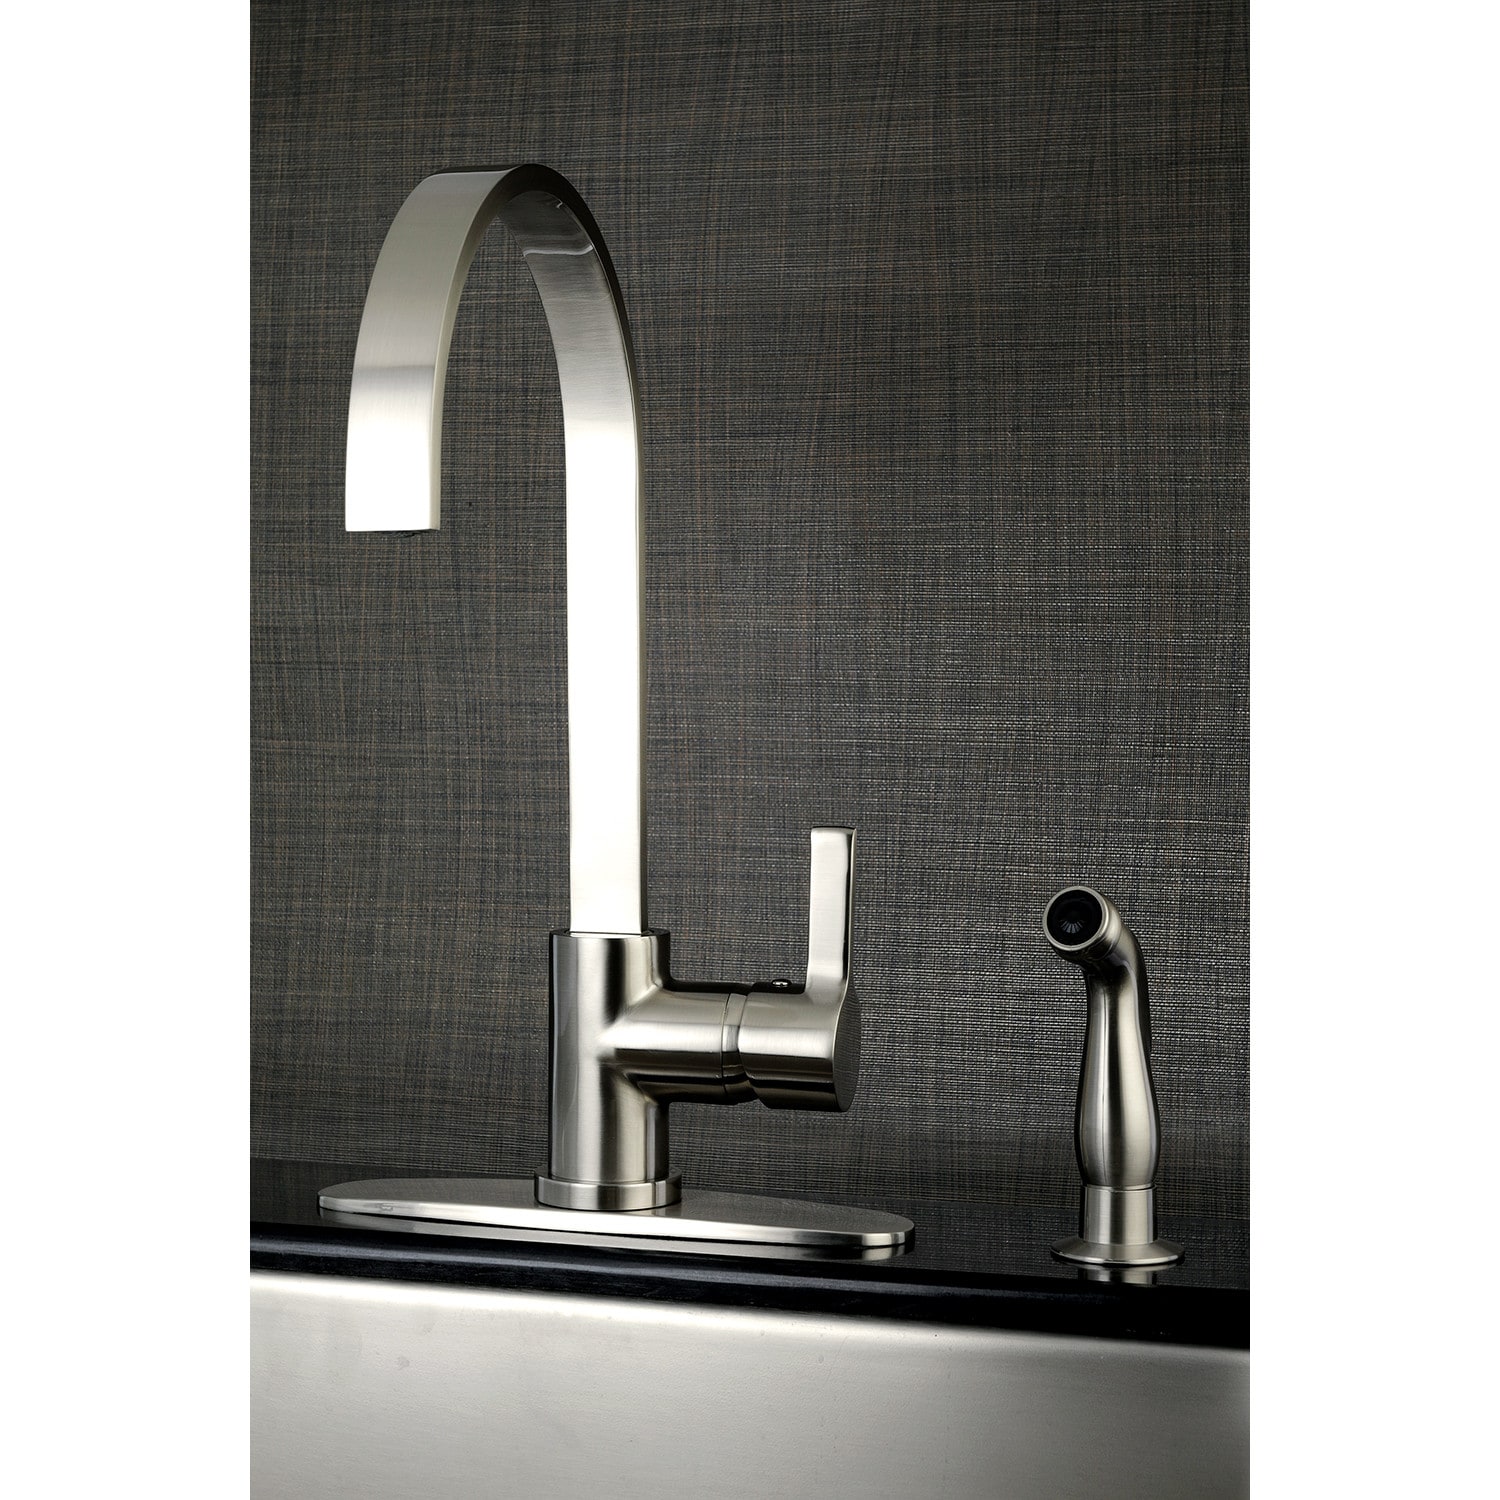 Kingston Brass Continental Brushed Nickel Single Handle High-arc Kitchen Faucet with Sprayer Function (Deck Plate Included)